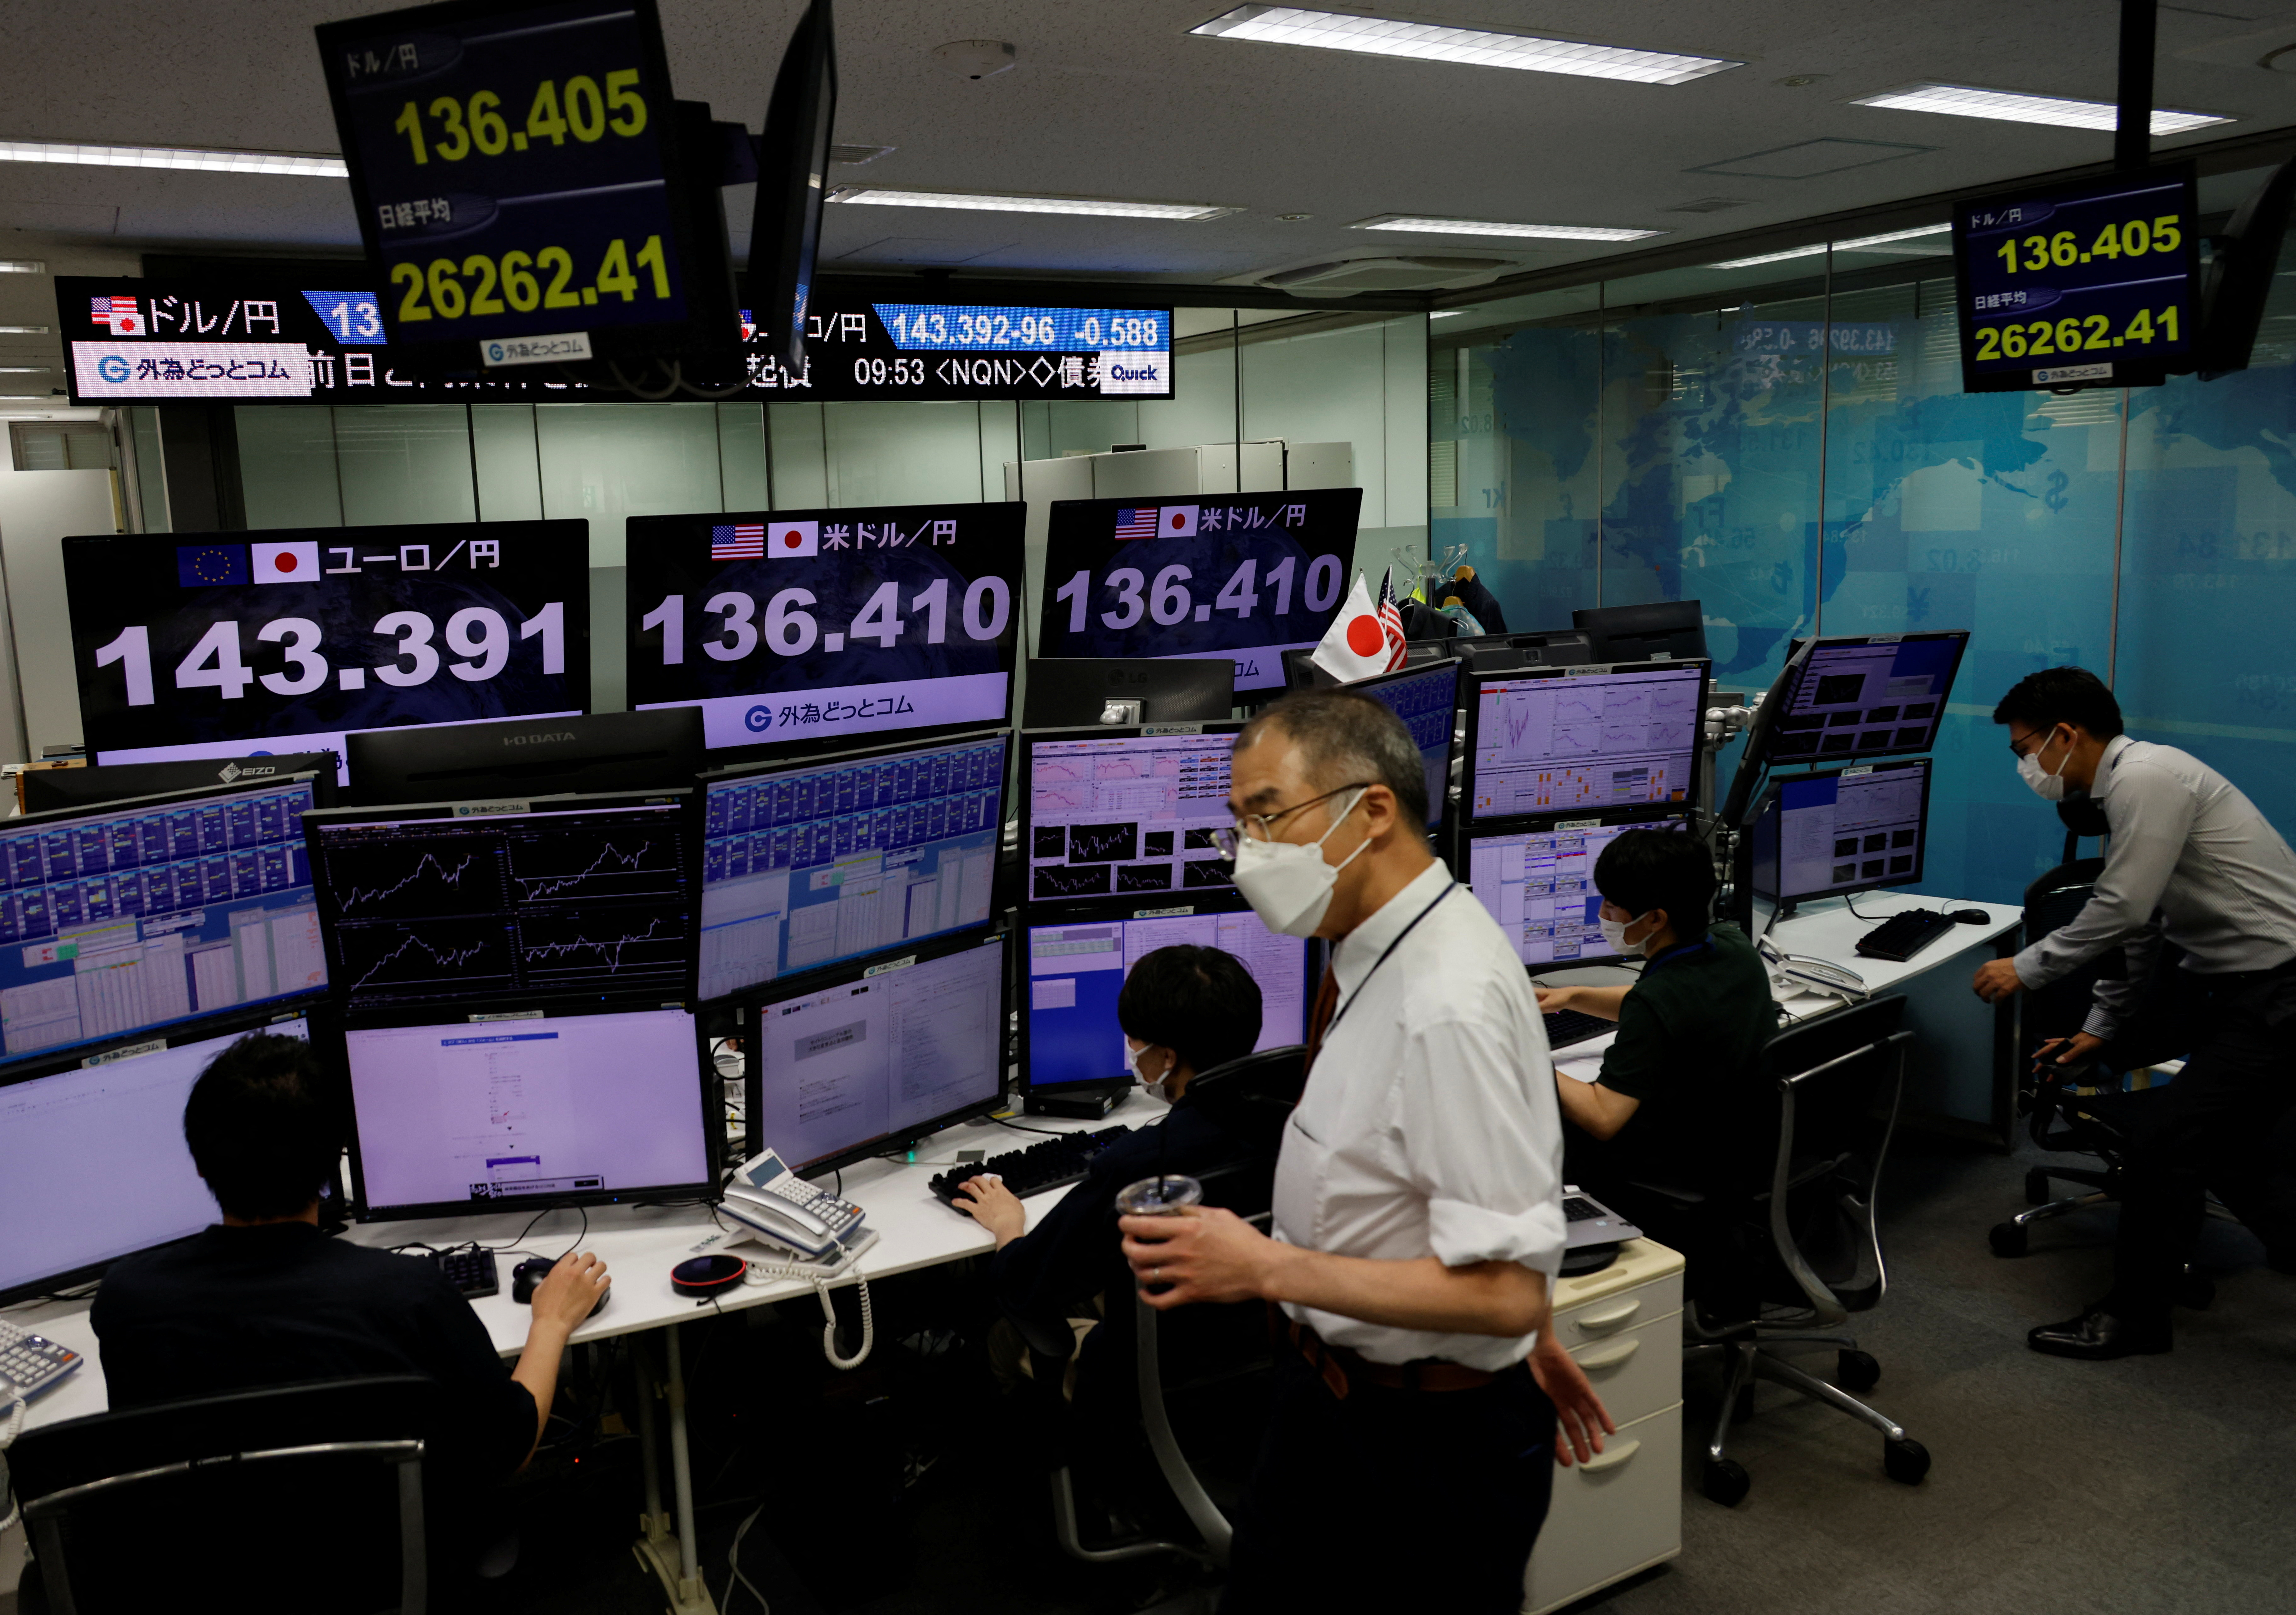 Employees of the foreign exchange trading company Gaitame.com work at its dealing room in Tokyo